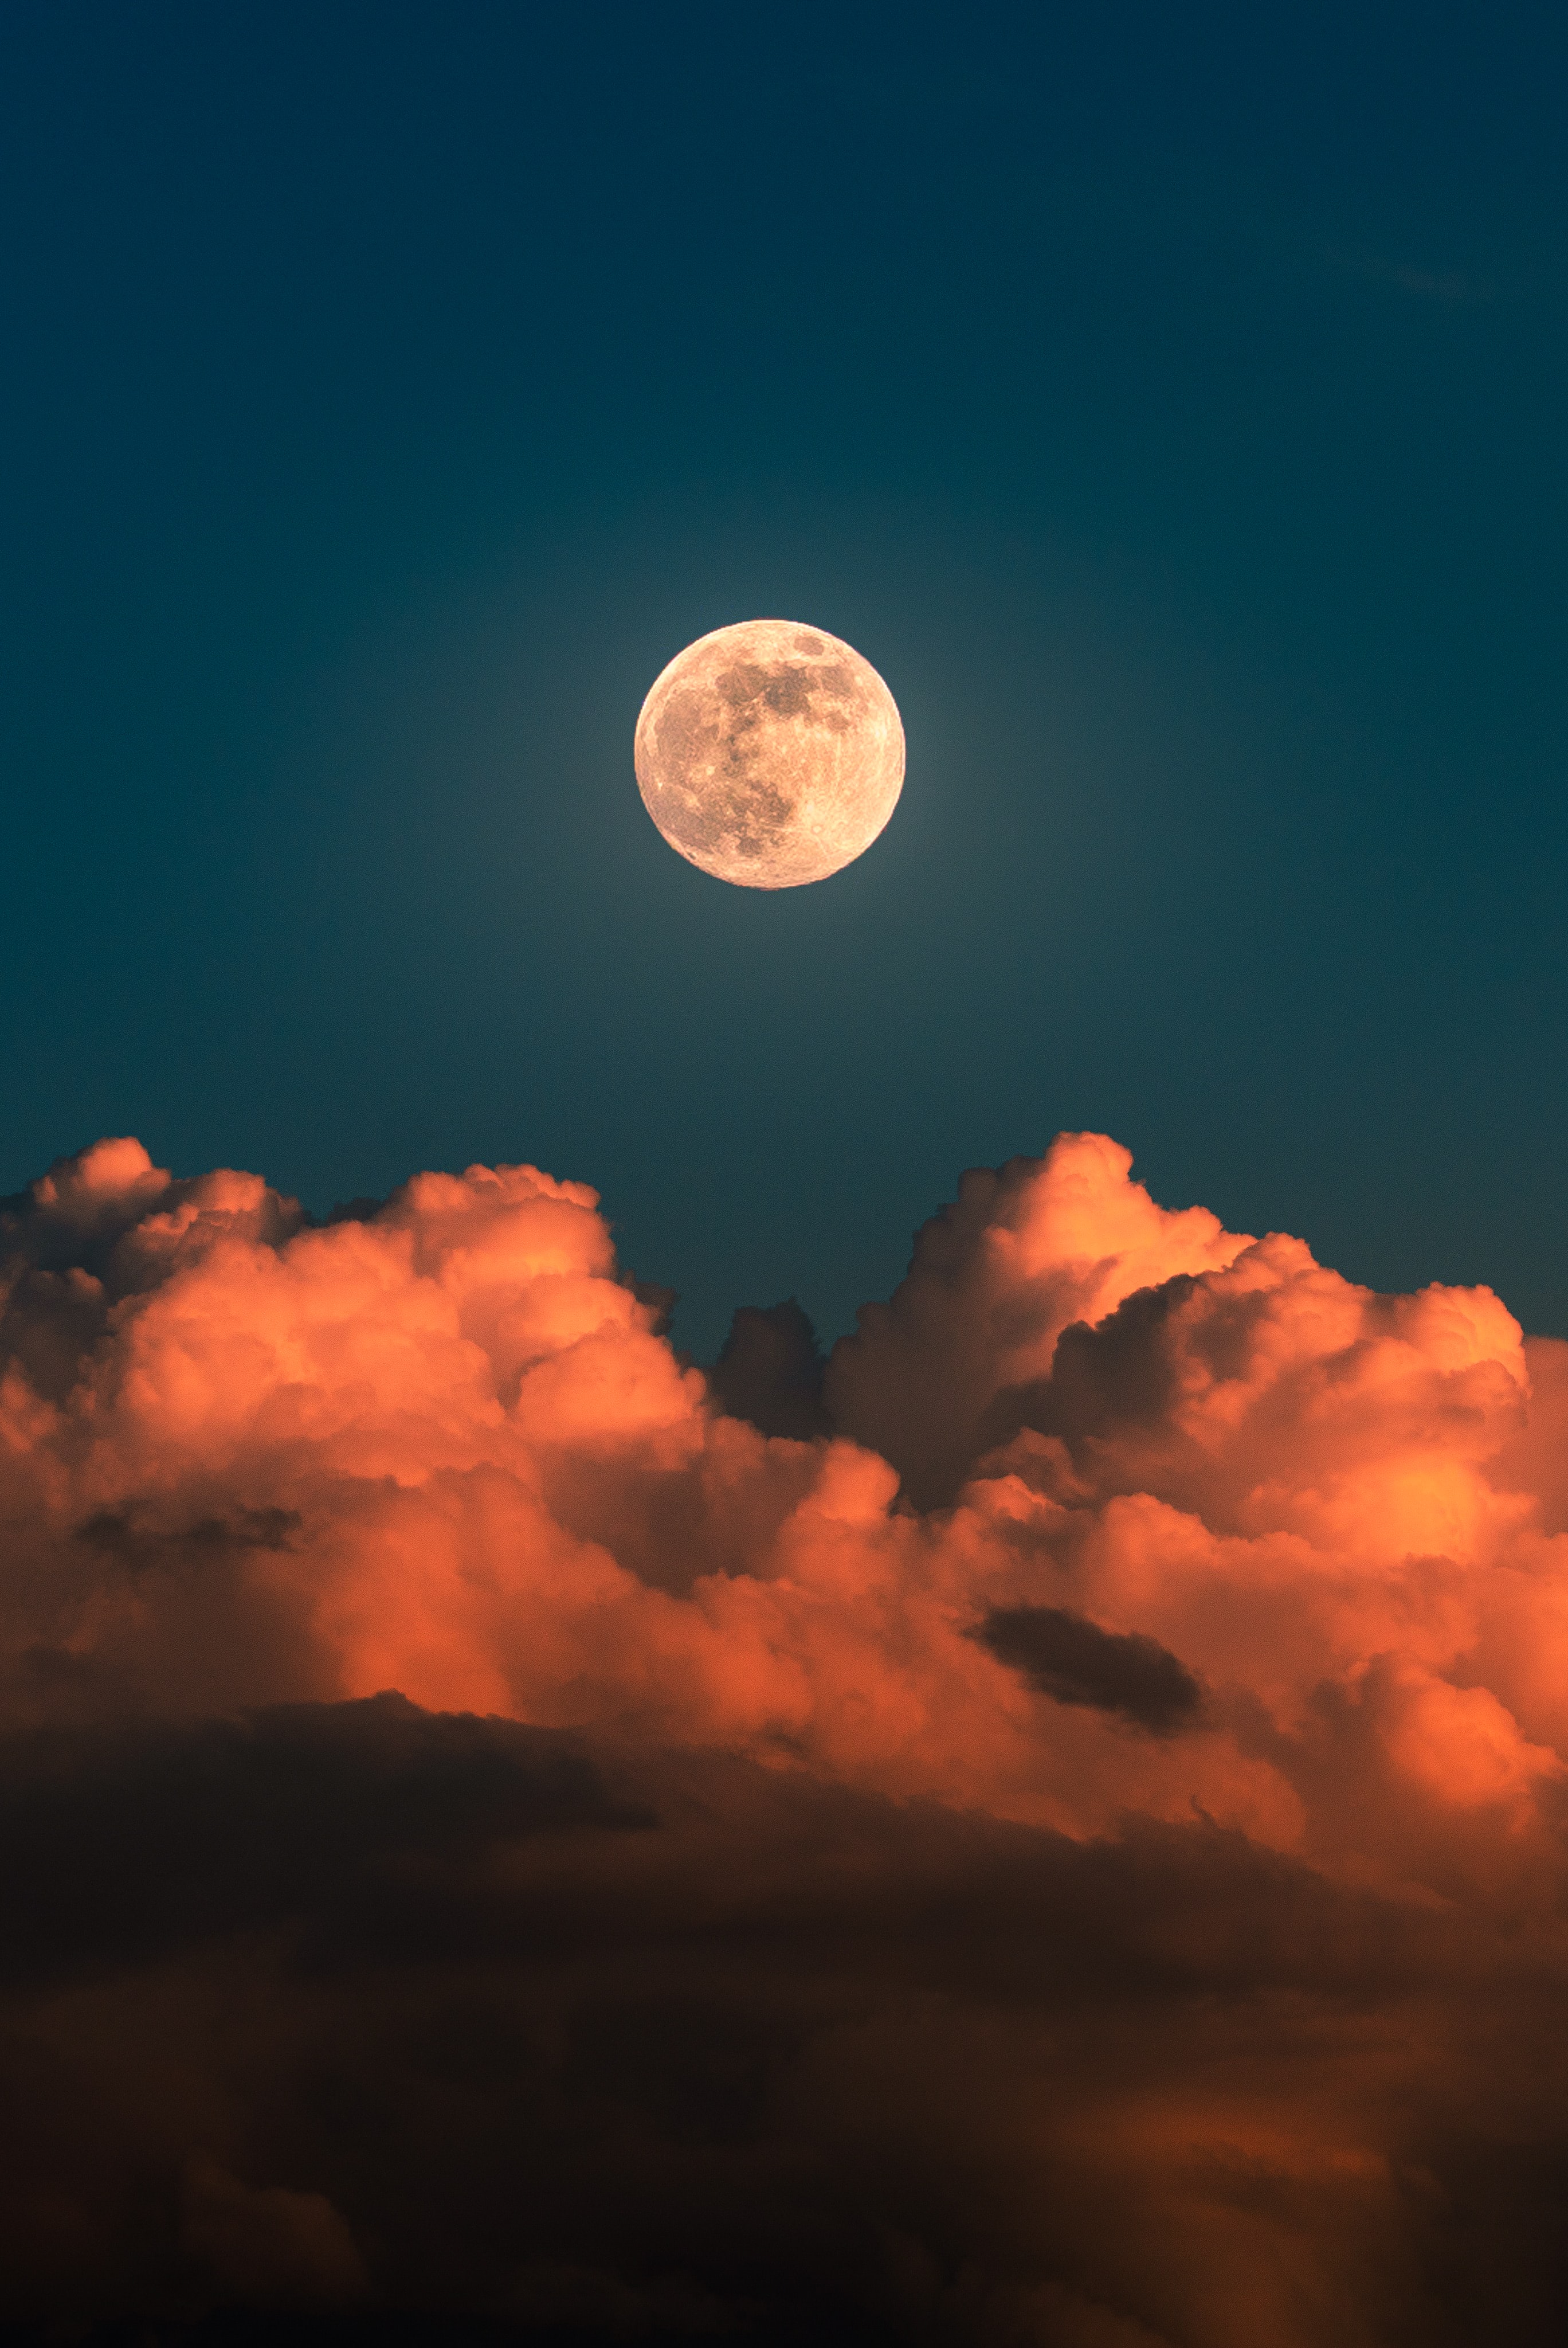 moon, clouds, full moon, nature, sky 1080p